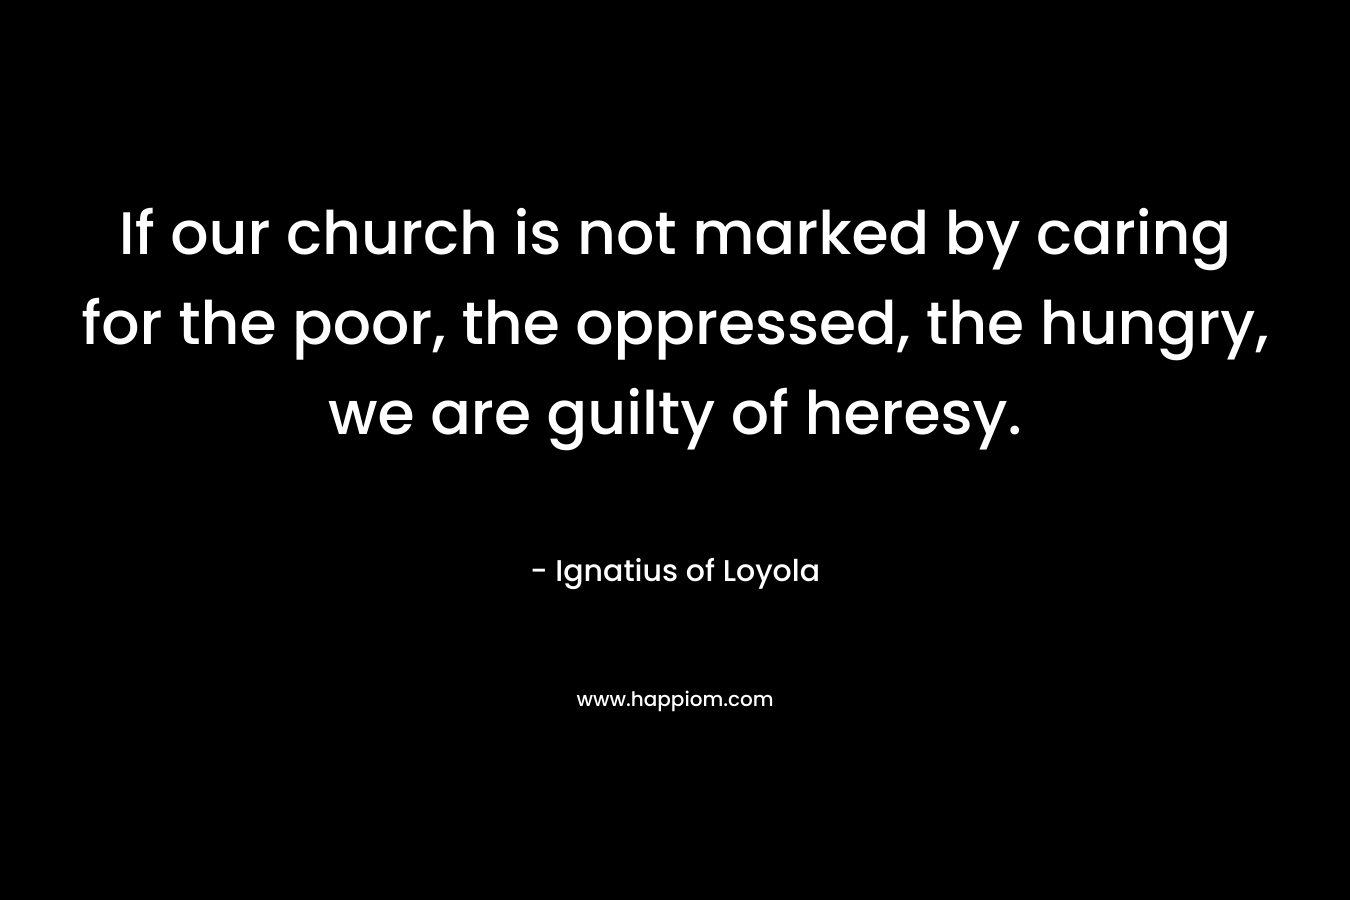 If our church is not marked by caring for the poor, the oppressed, the hungry, we are guilty of heresy. – Ignatius of Loyola